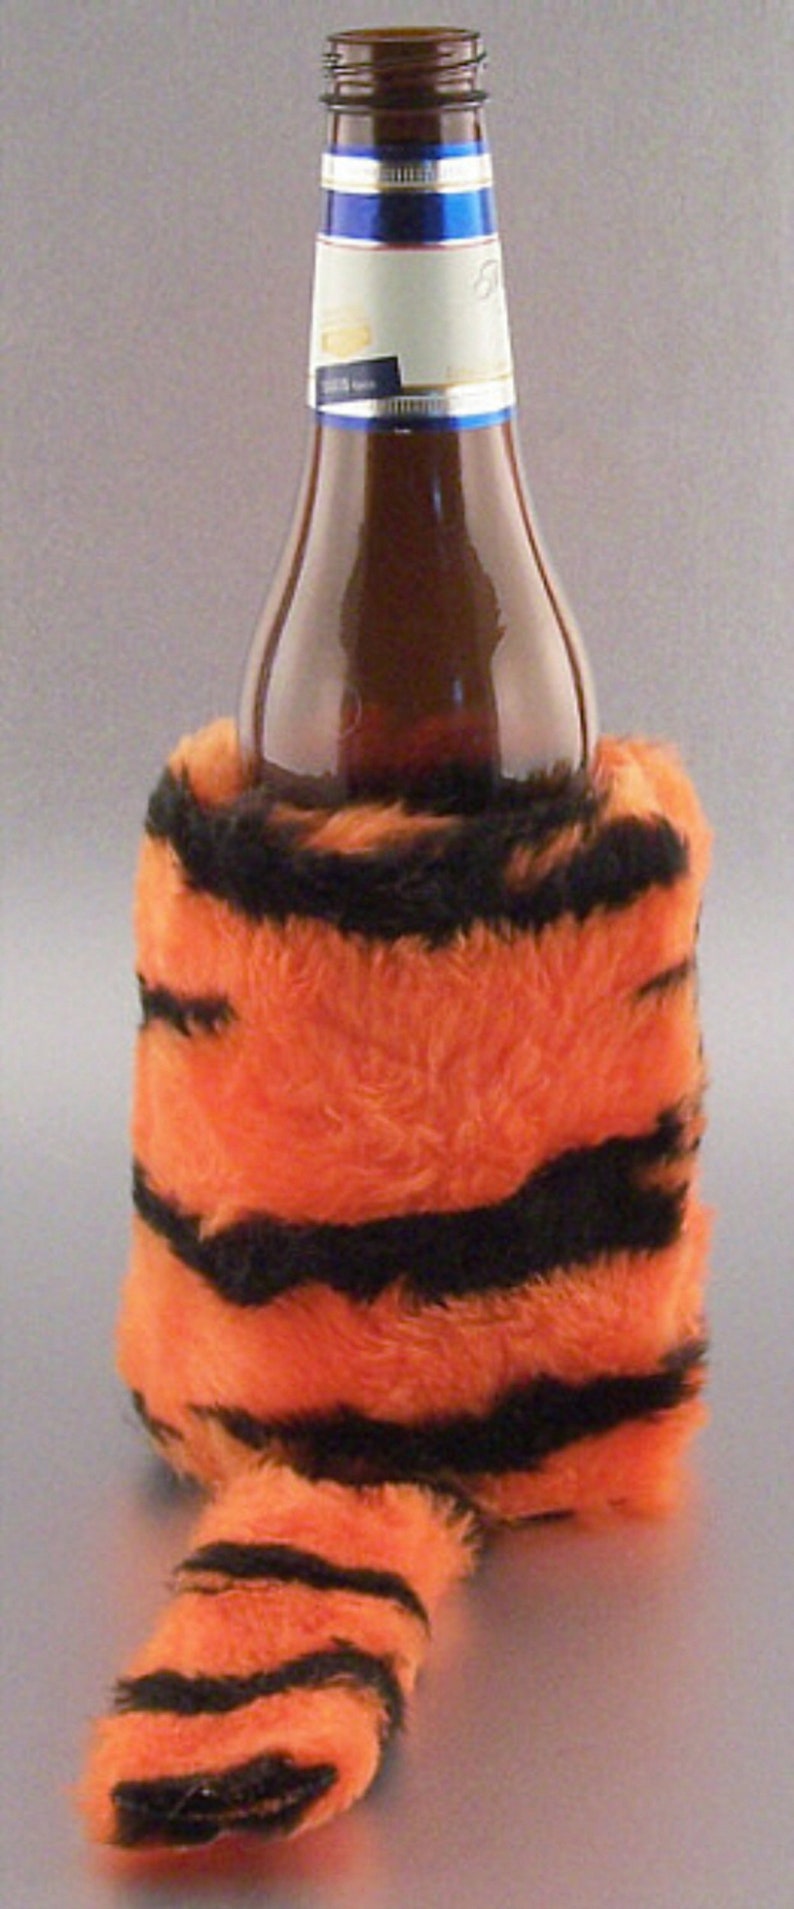 2 qty Faux Fur w/Tail Beverage Insulator CAN/Bottle & CUP Size PocketHuggies Beer, Water, Coffee Bengal Clemson Bearcat Cincinnati image 9